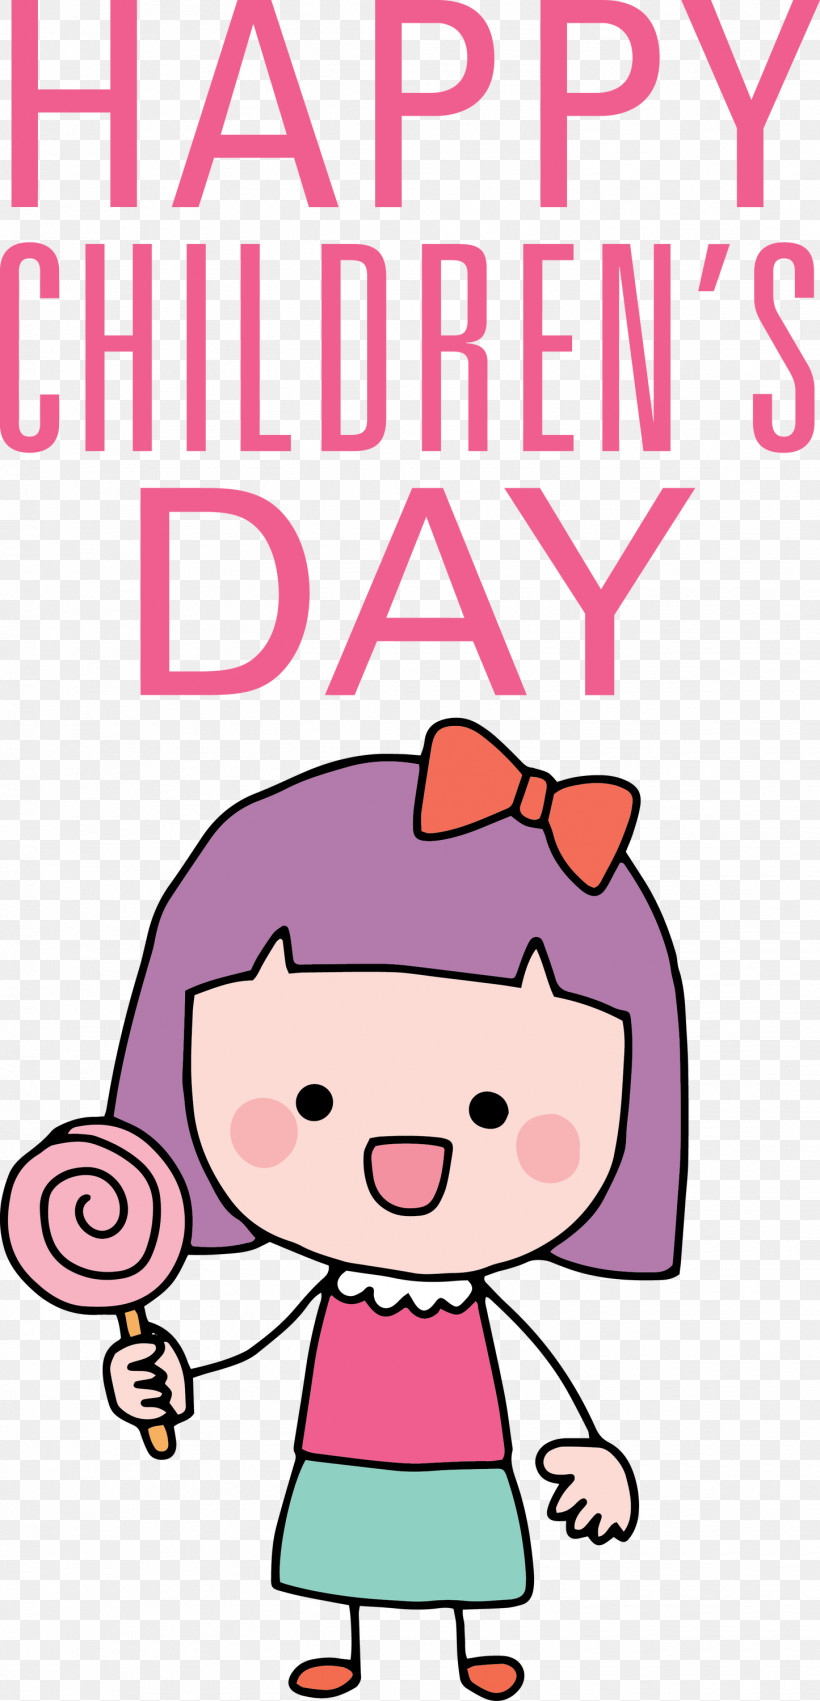 Cute Childrens Day Banner, PNG, 1445x2999px, Happiness, Cartoon, Laughter Download Free